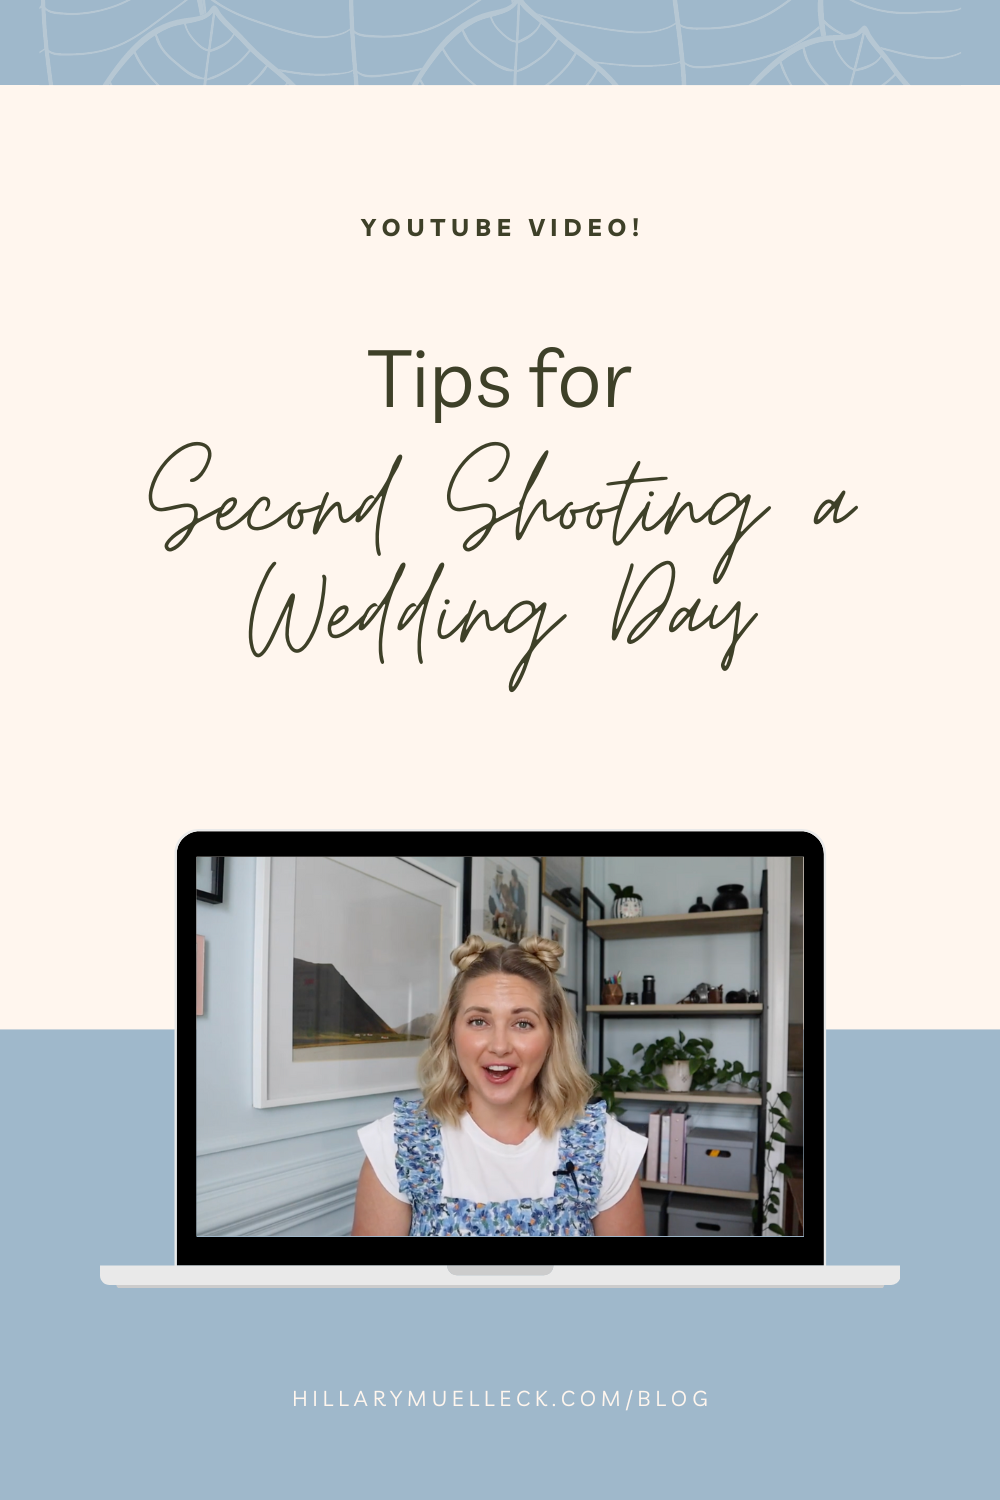 Tips for second shooting a wedding as a photographer: NC wedding photographer Hillary Muelleck shares her tricks as a 2nd photographer